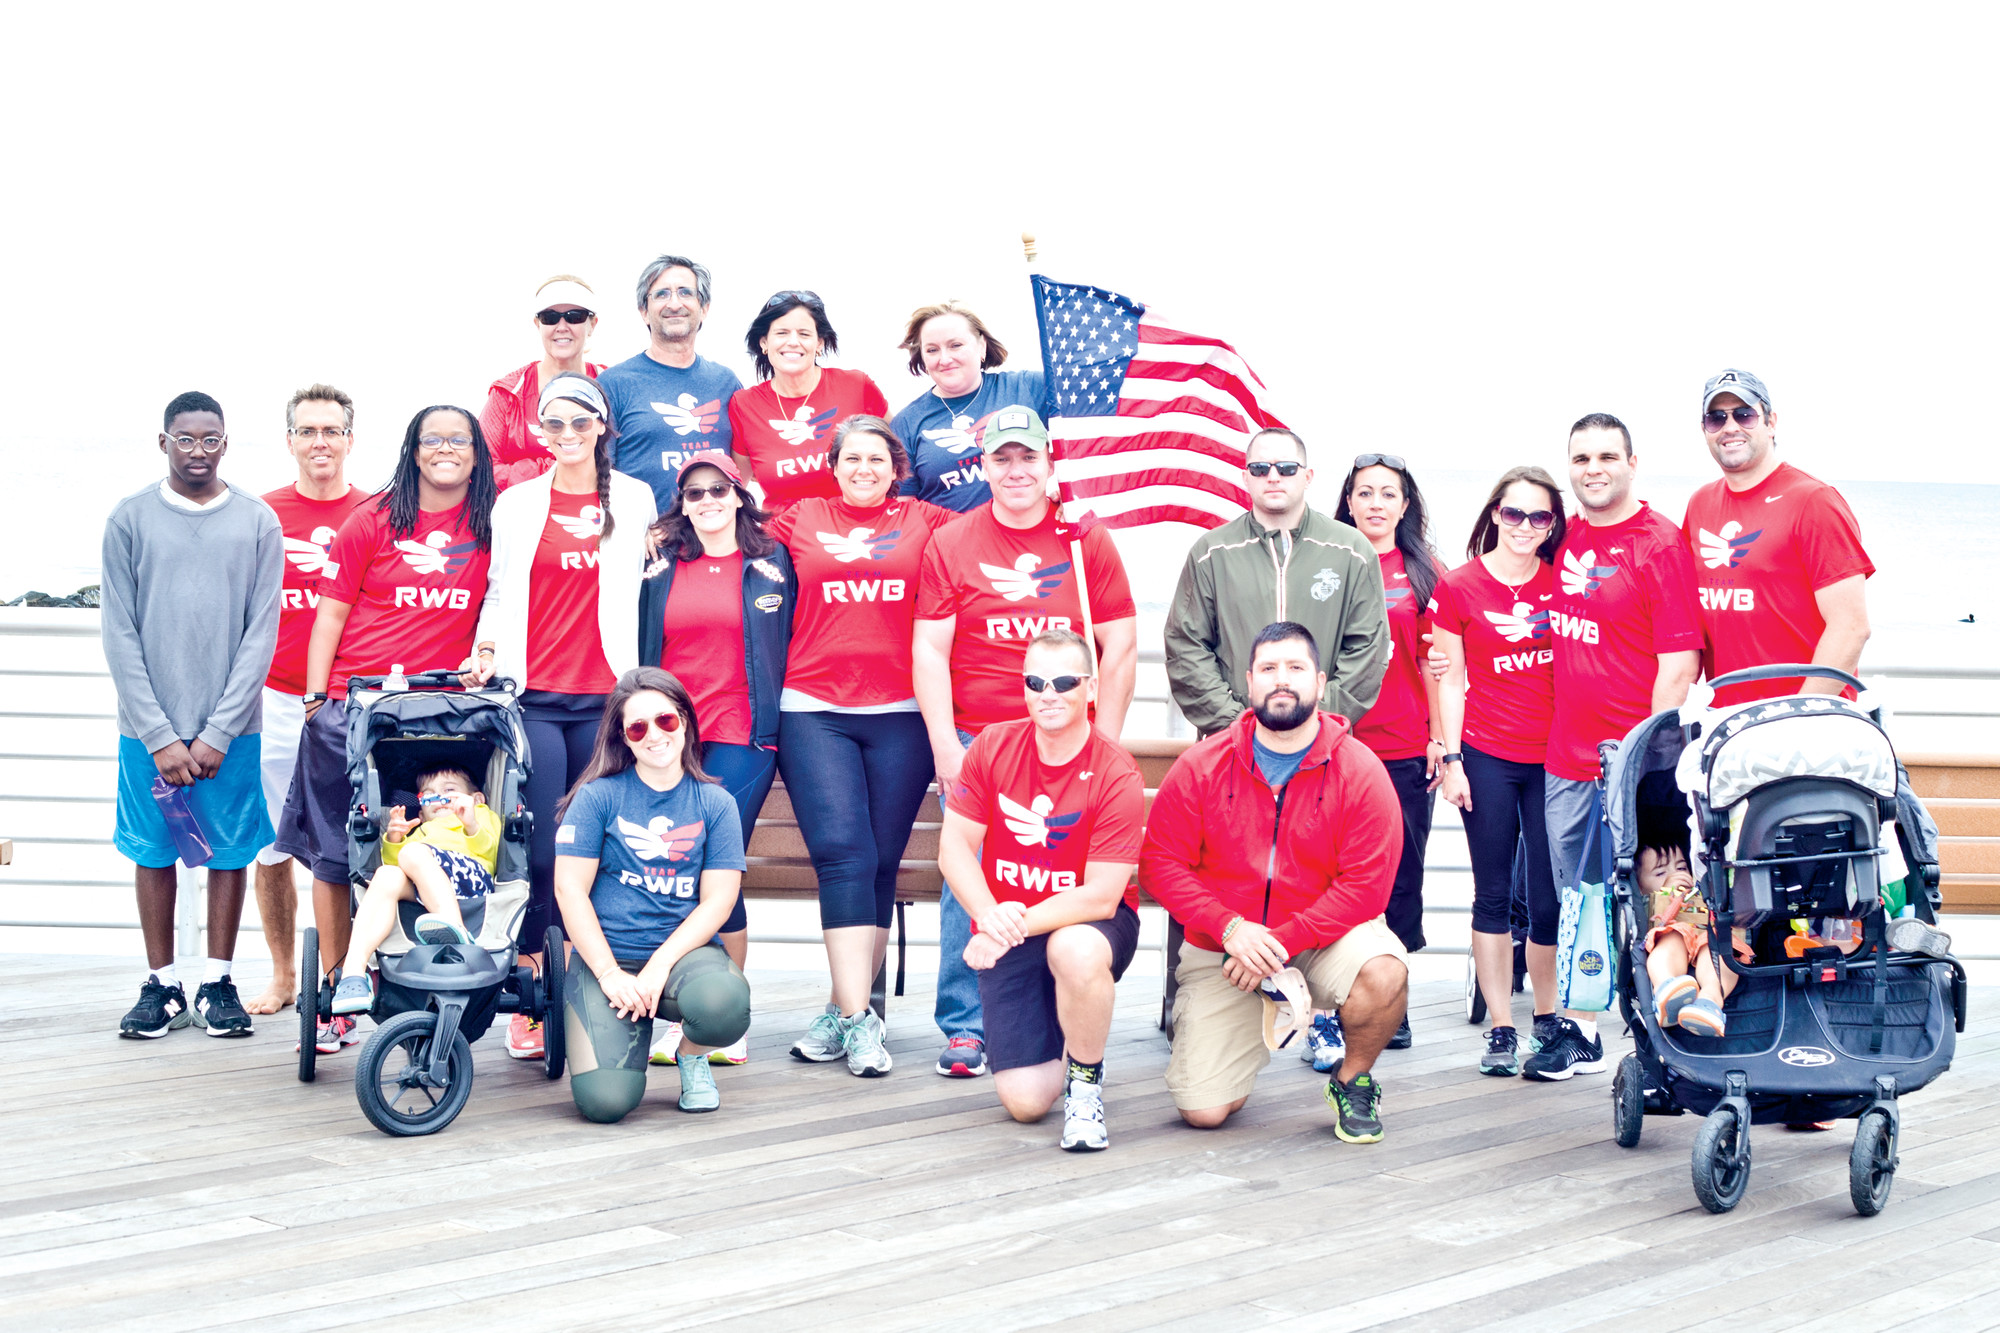 Eric Dunetz/HeraldMembers of Team RWB, a service organization whose mission is to enrich the lives of Americans by connecting them in their community through physical and social activity.